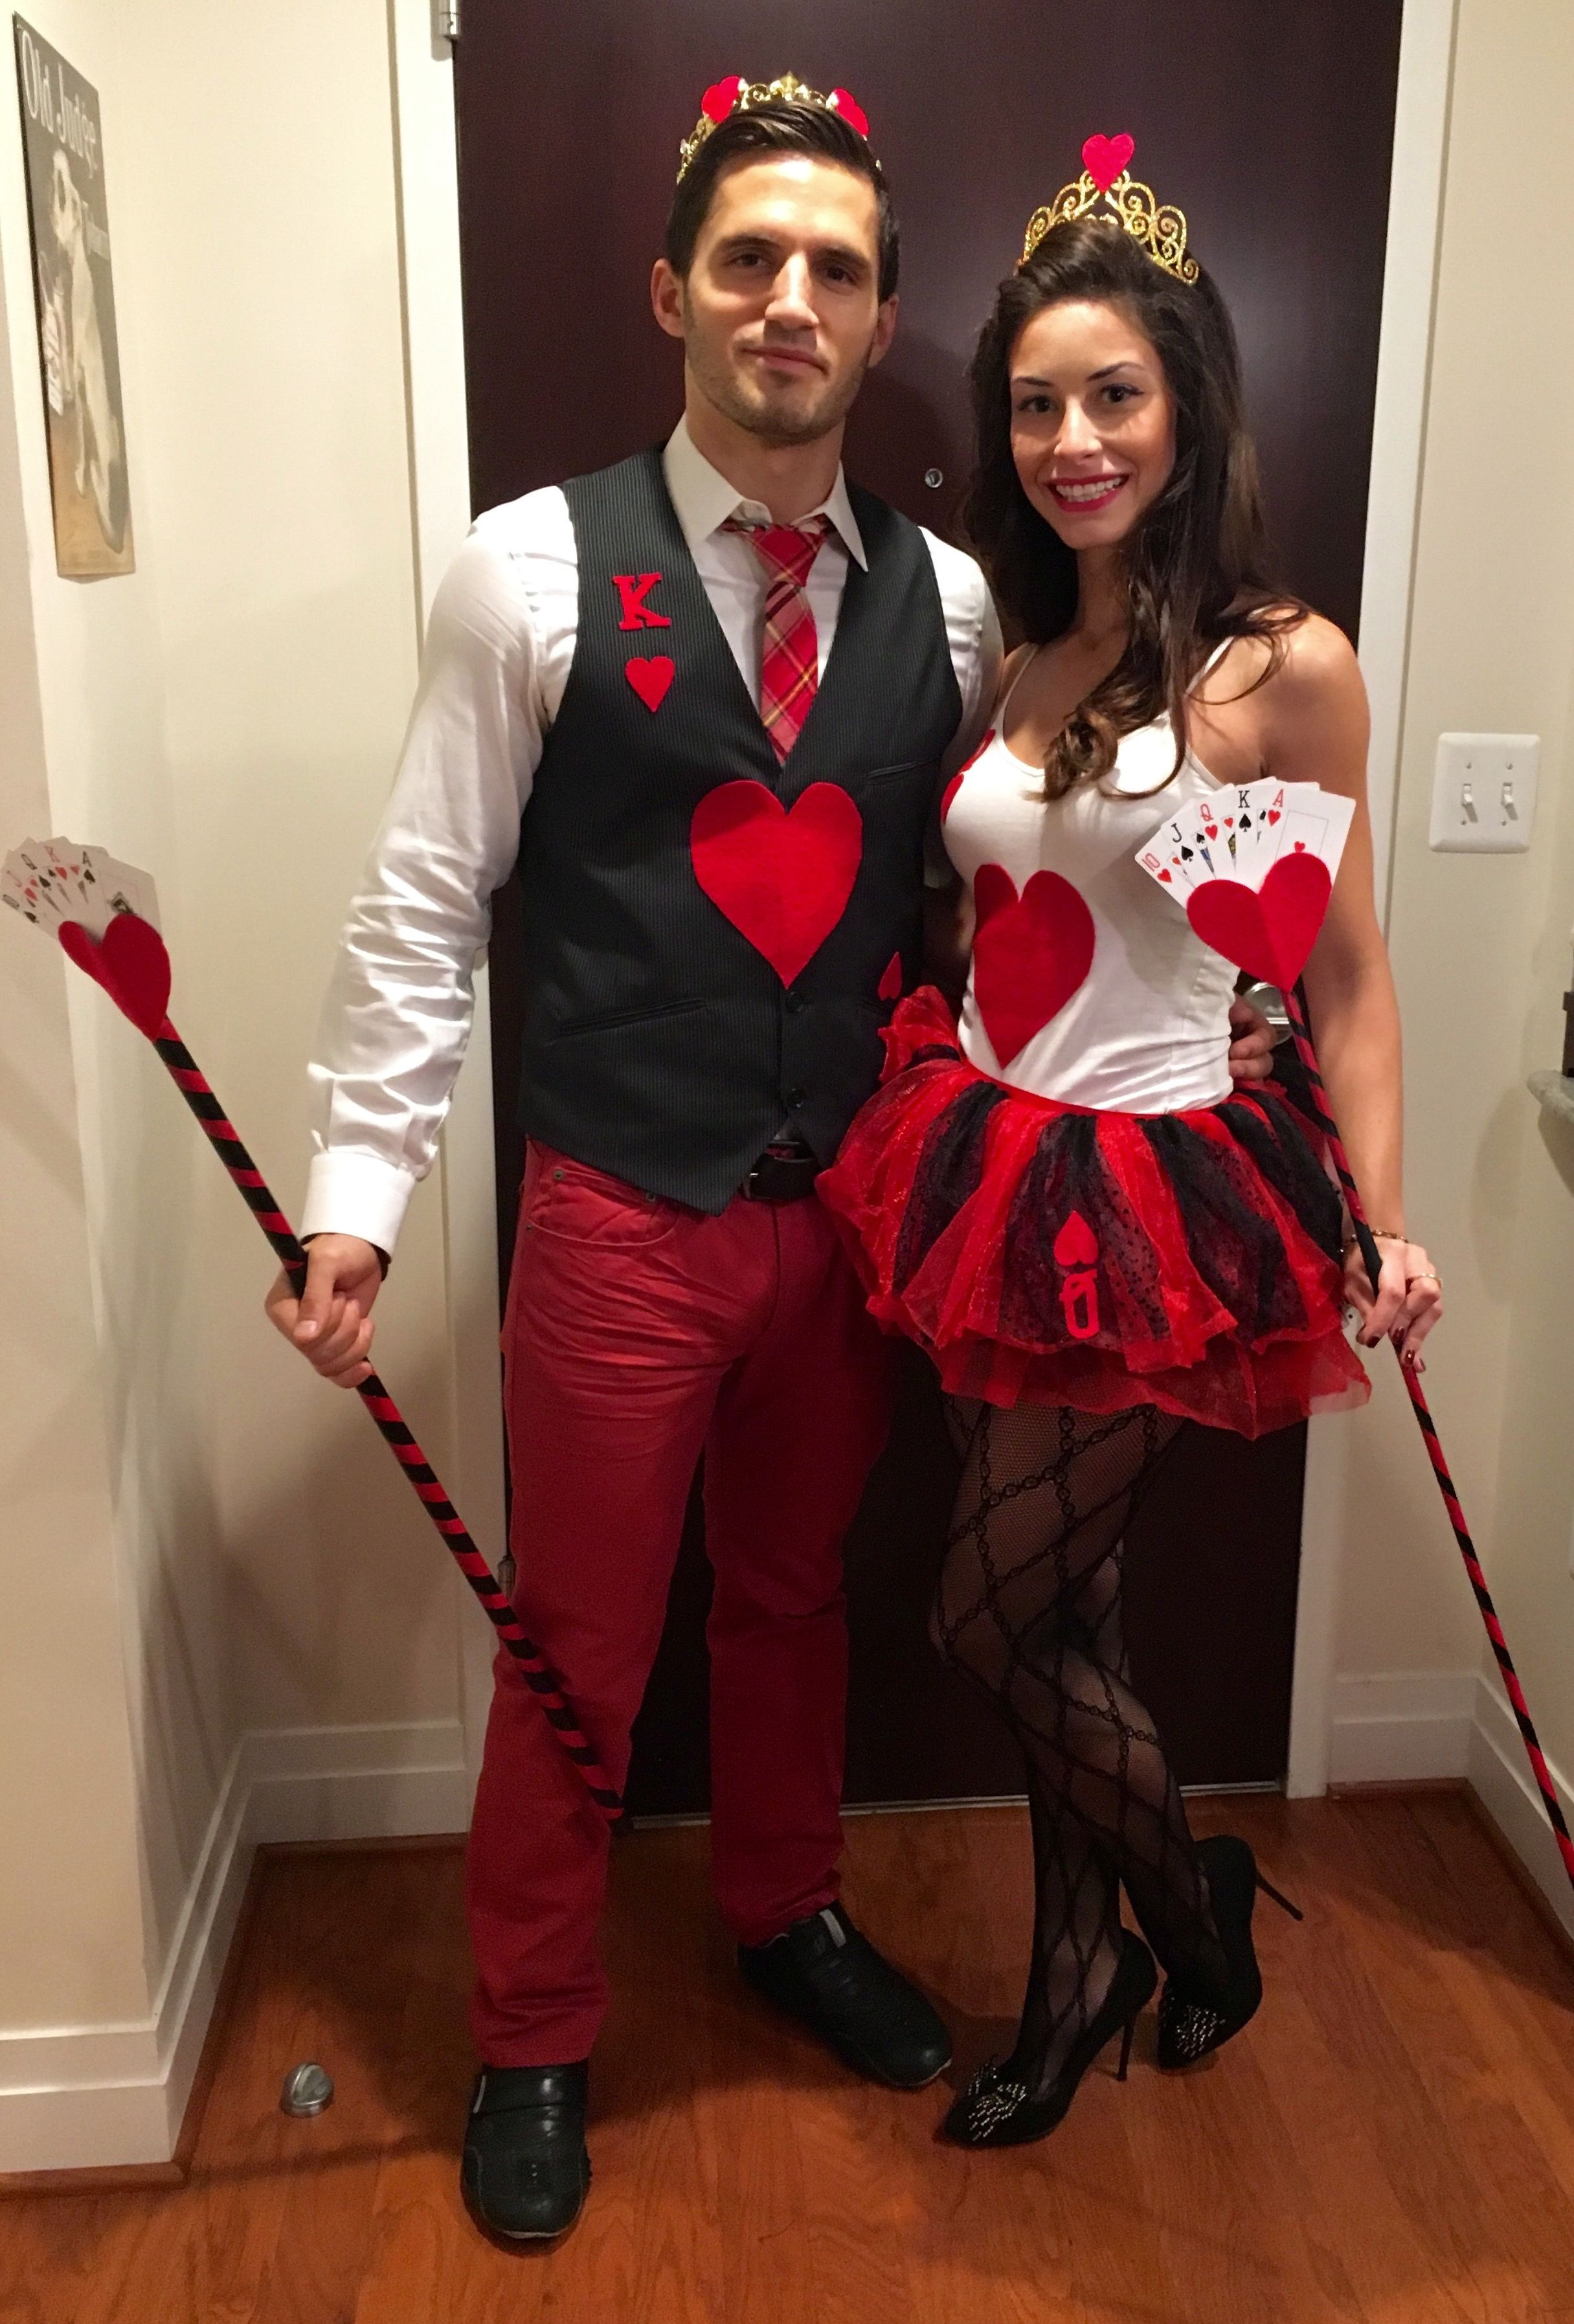 DIY Costume For Couples
 Best 25 King of hearts costume ideas on Pinterest